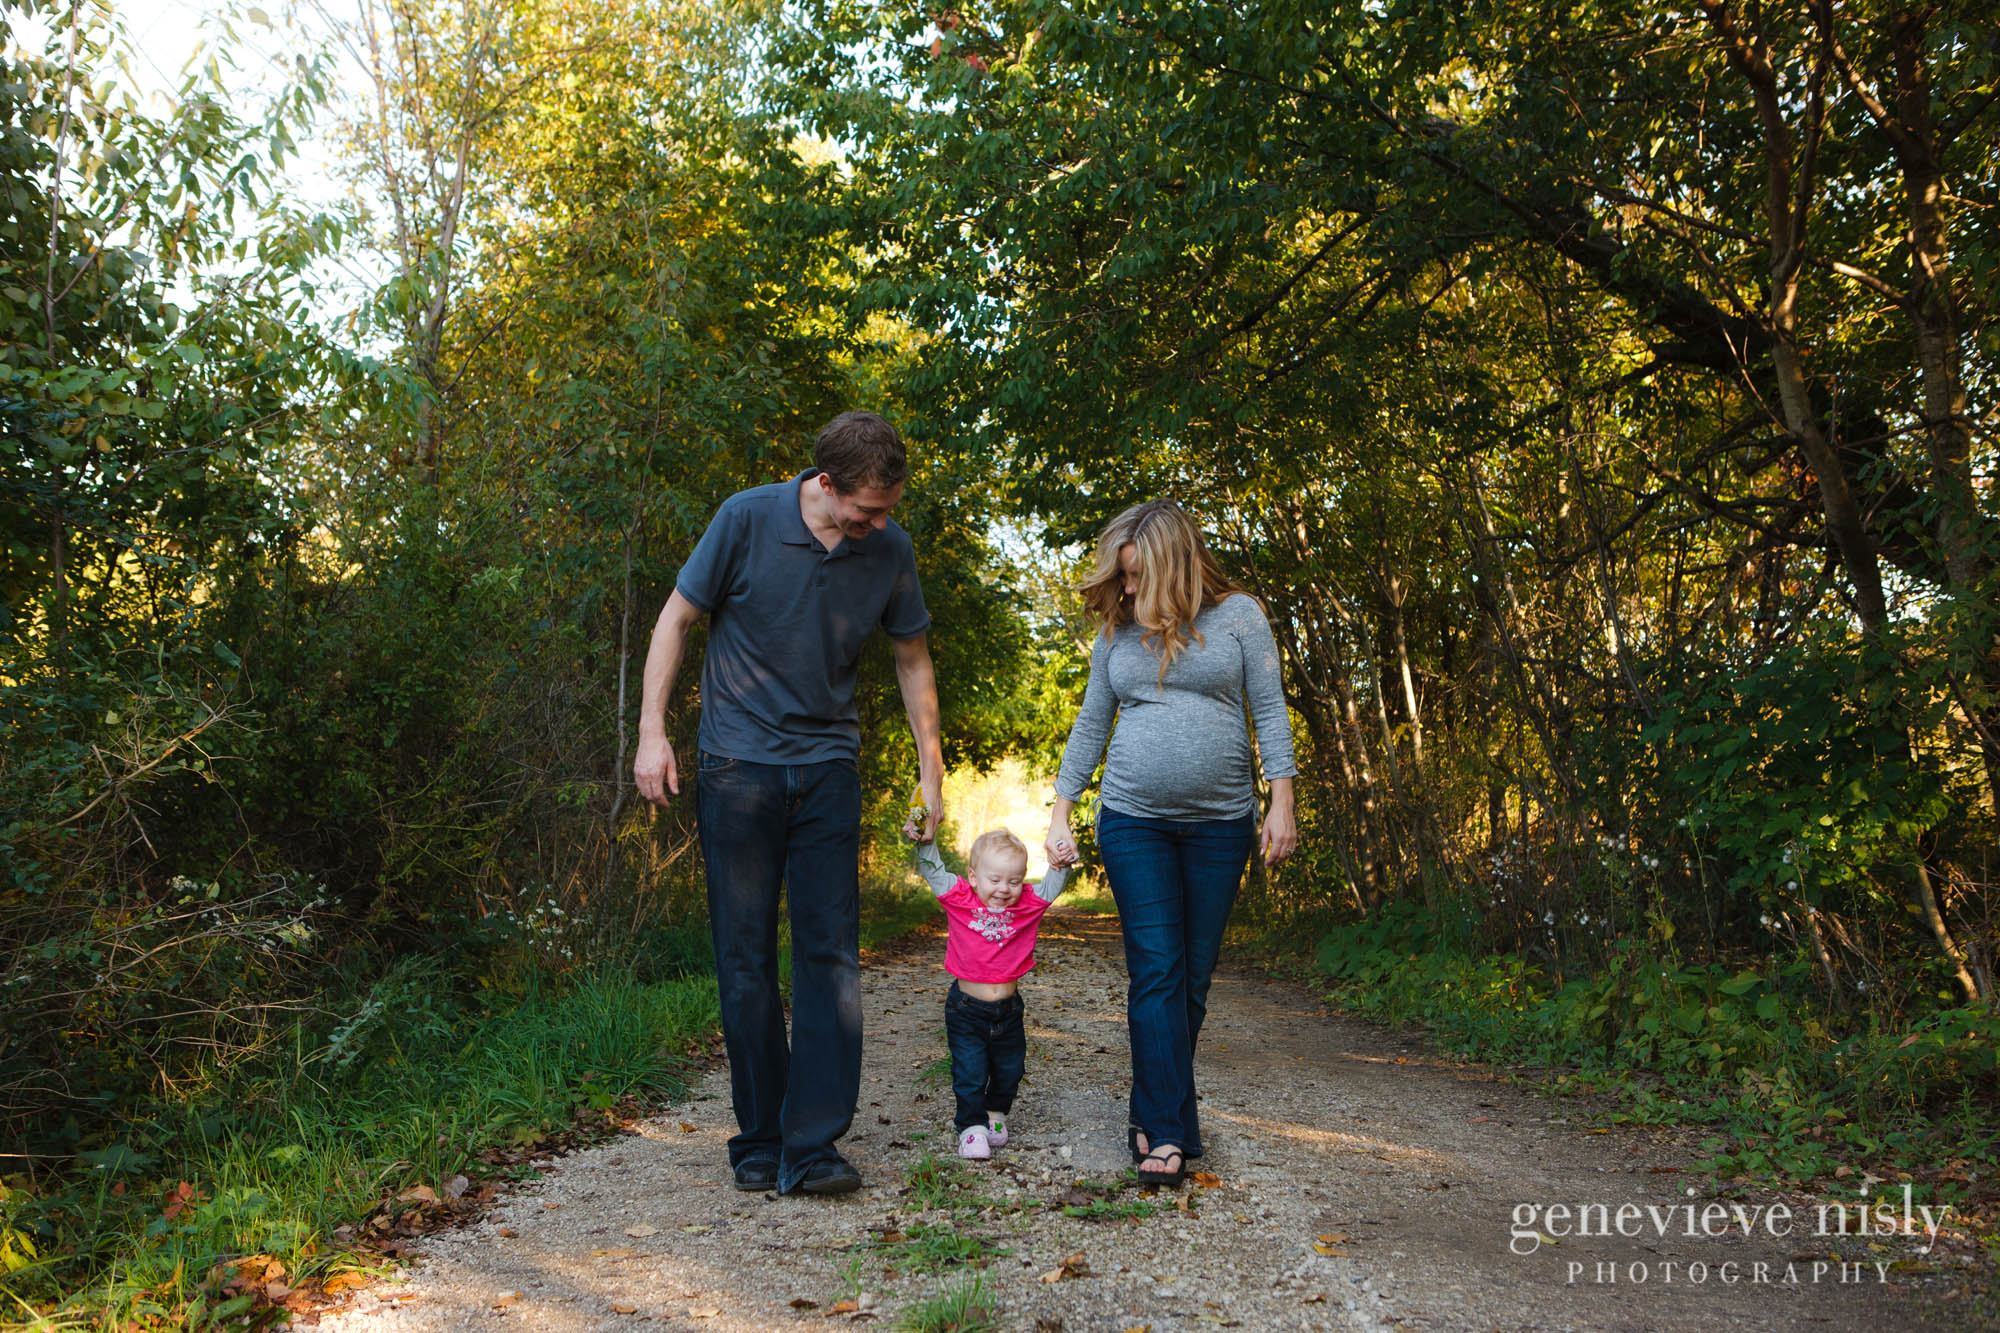  Copyright Genevieve Nisly Photography, Family, Portraits, Summer